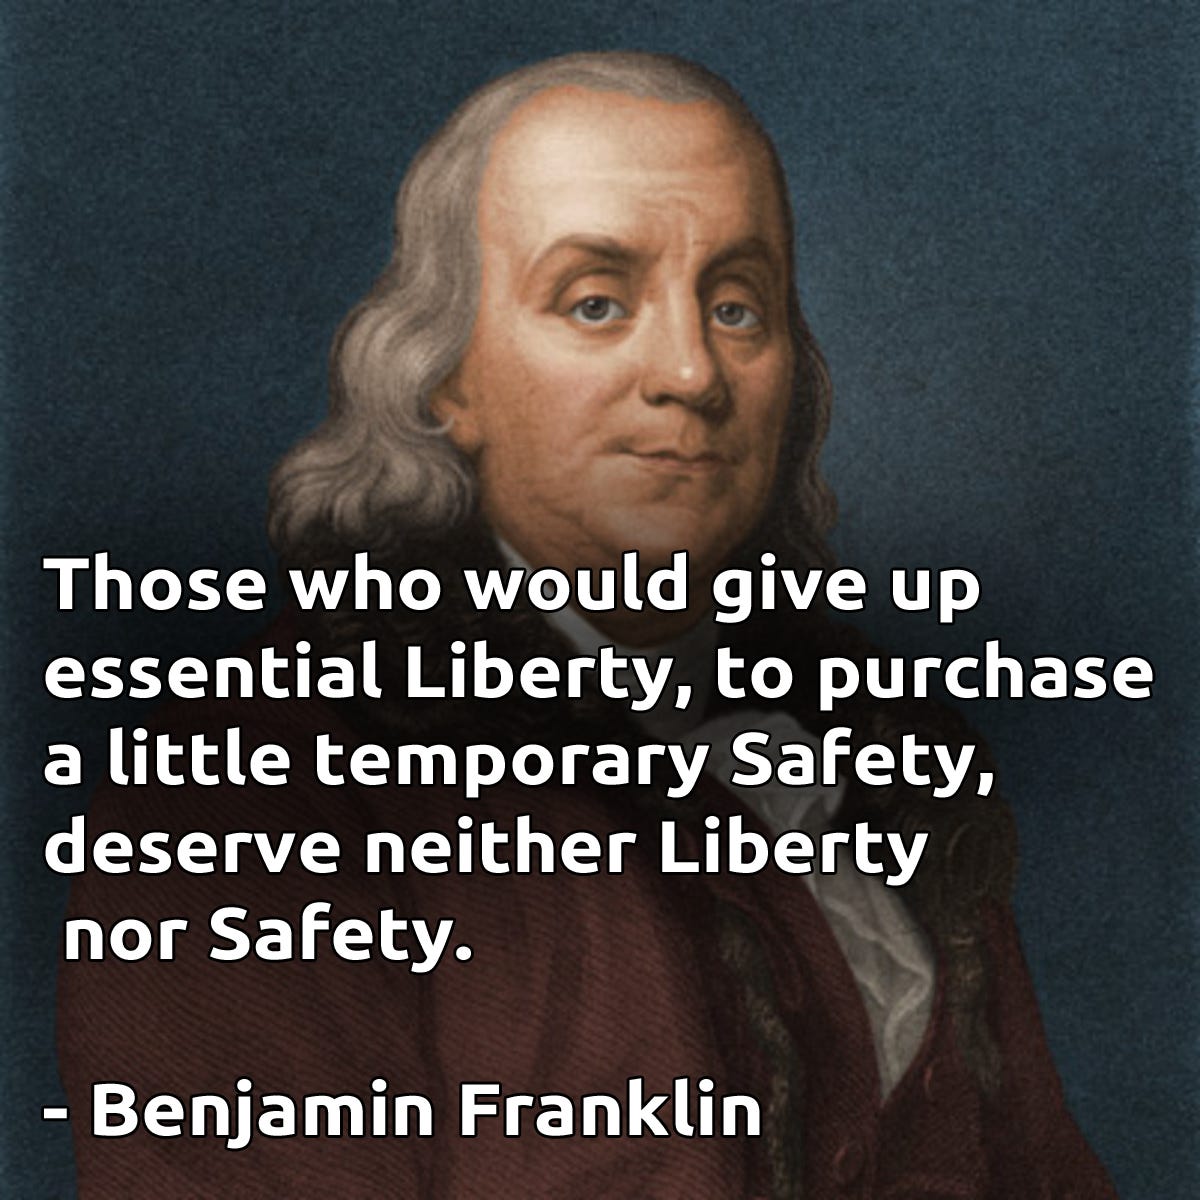 Those who would give up essential Liberty, to purchase a little temporary  Safety, deserve neither Liberty nor Safety." - Benjamin Franklin  [1200x1200] : r/QuotesPorn